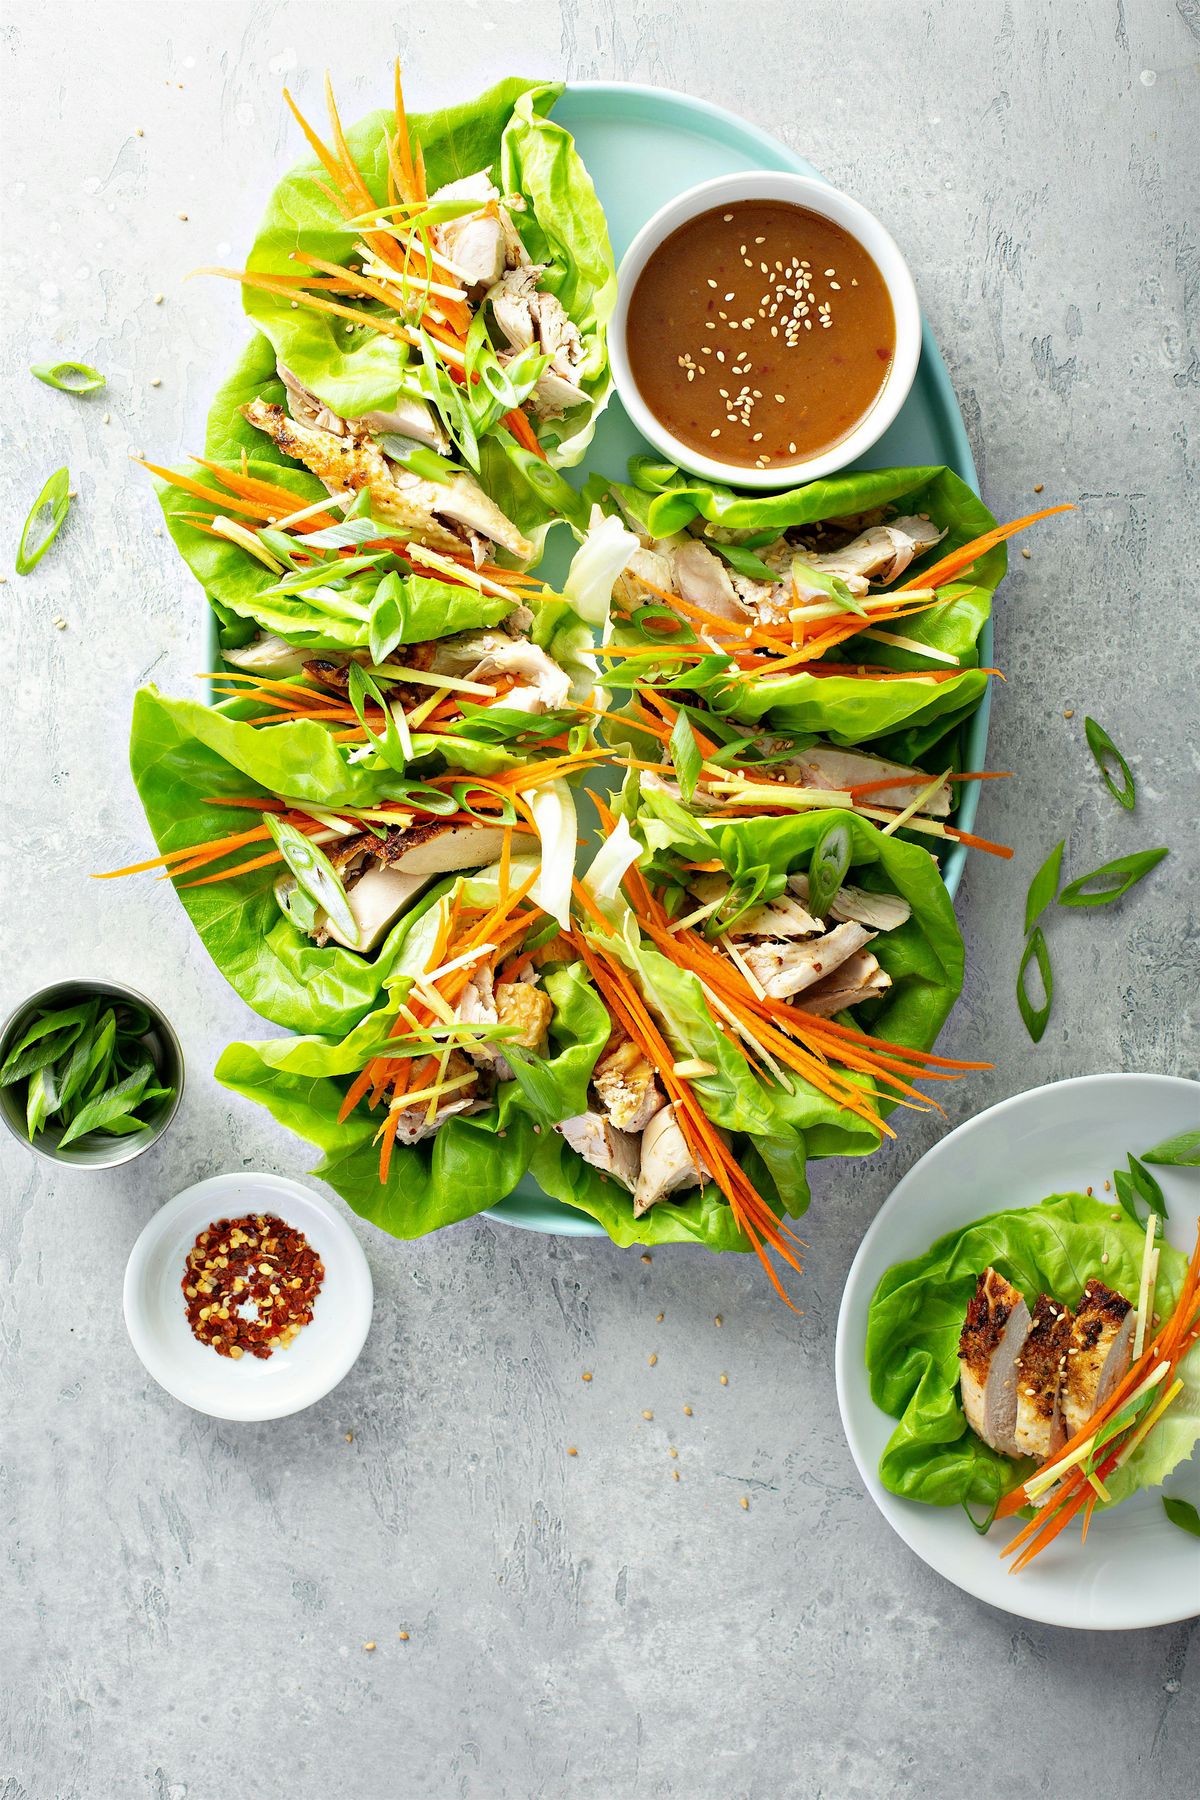 FREE Virtual Cooking Class: Chicken Lettuce Wraps with Peanut Sauce